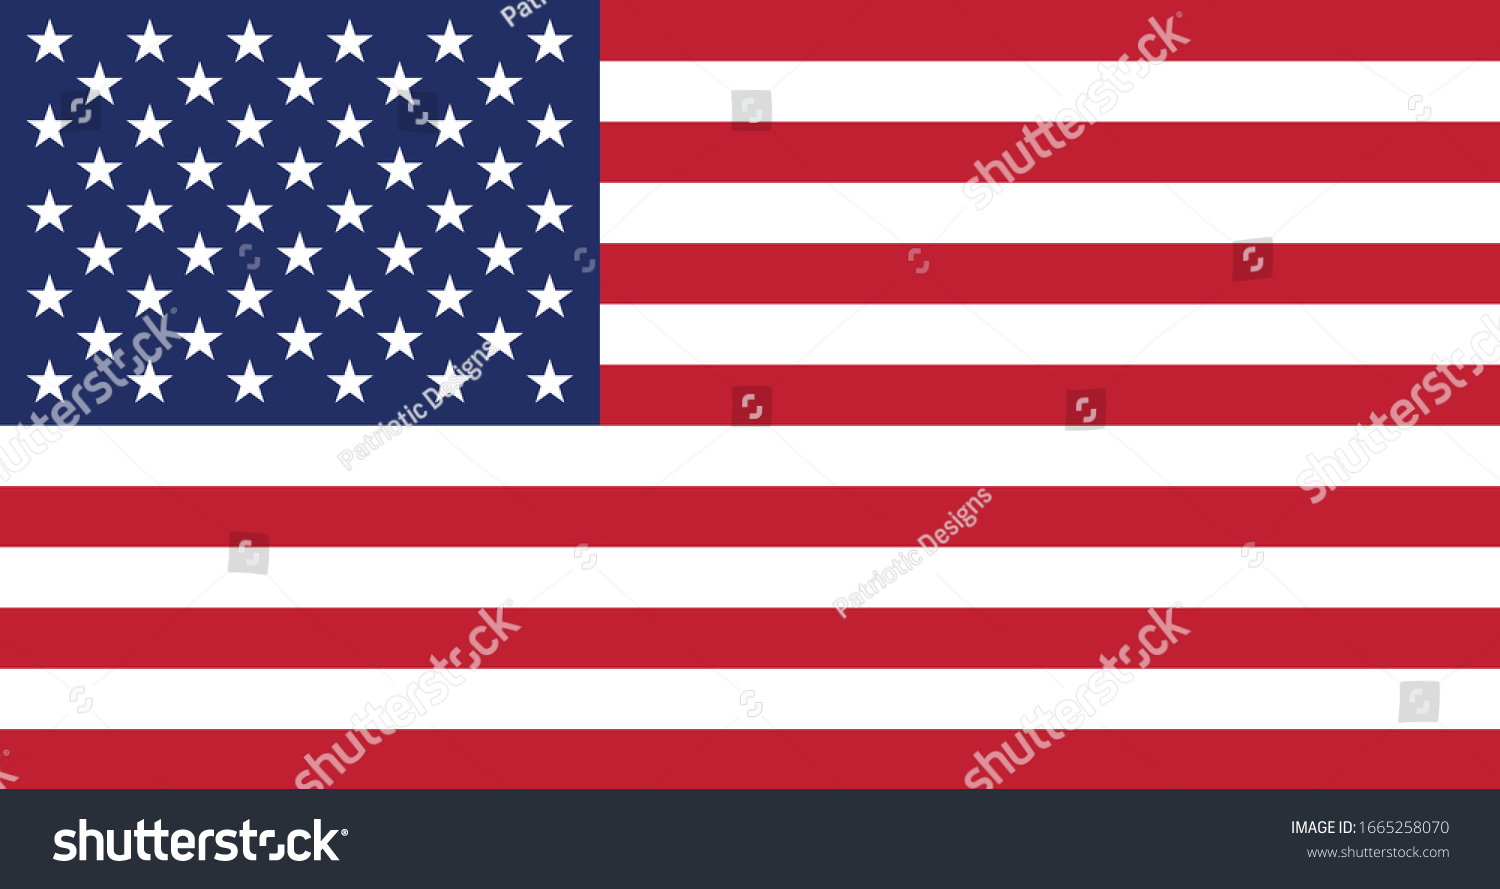 SVG of vector image of american flag svg